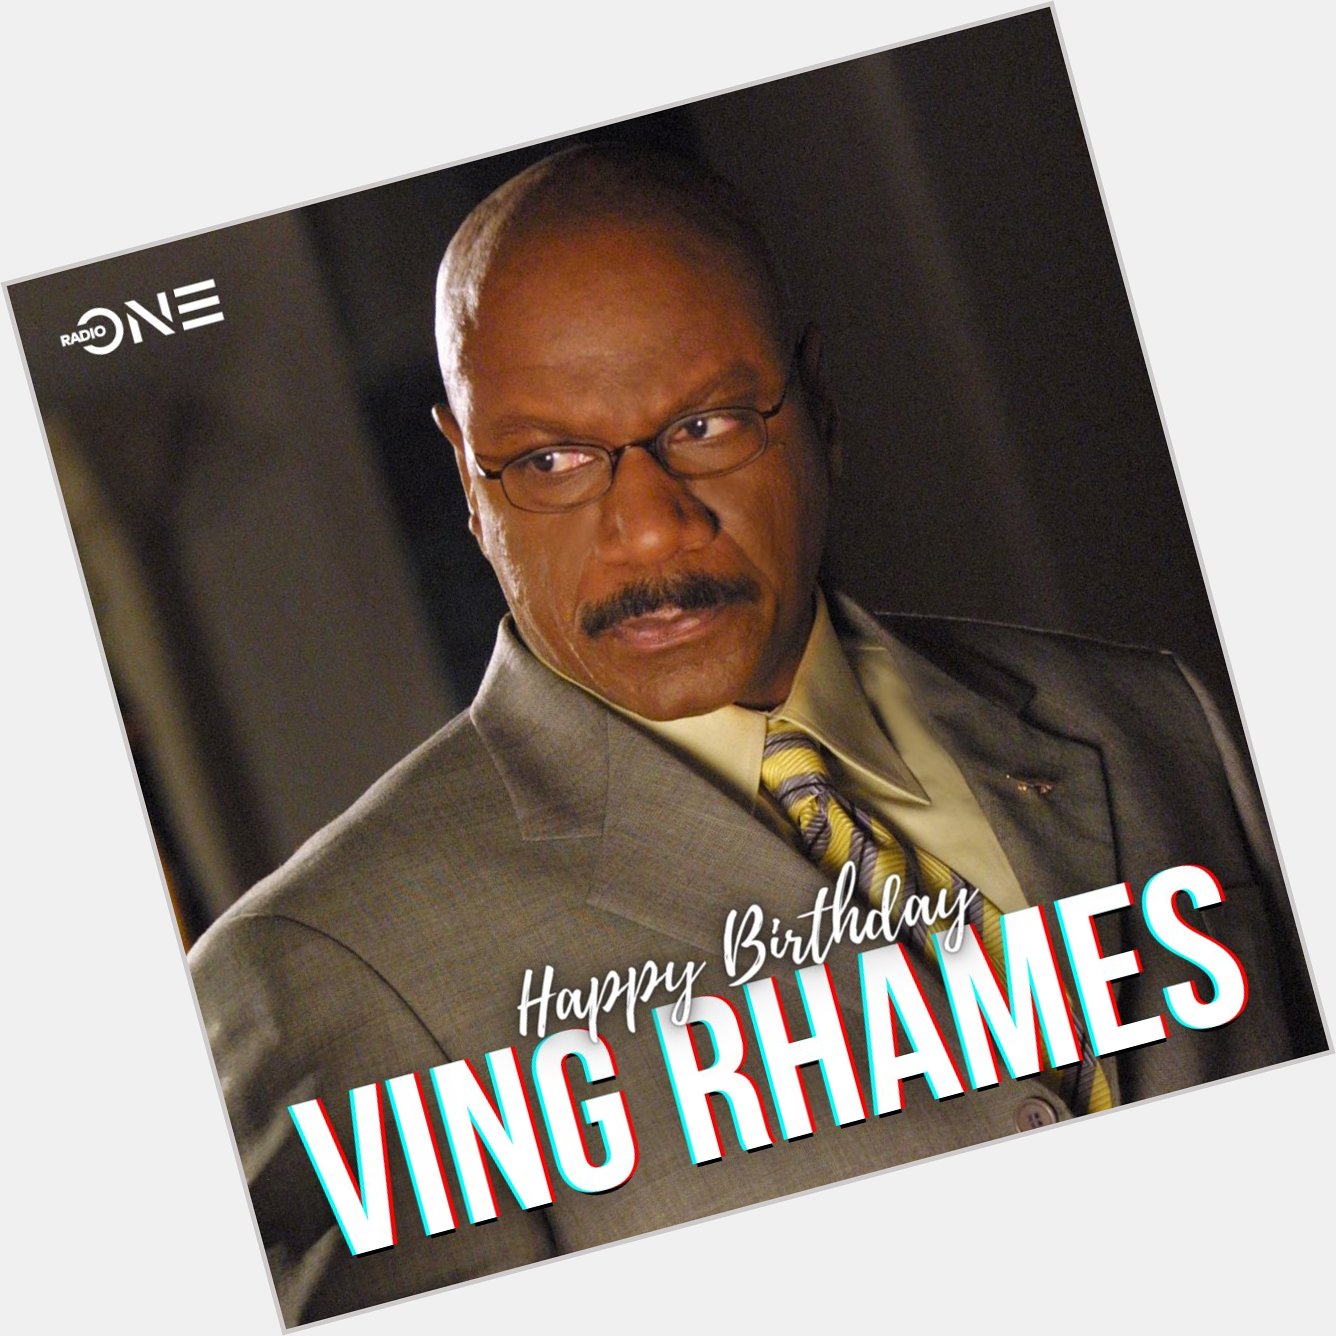 Our boy Ving Rhames turns 62 today Wishing a very Happy Birthday to the Hollywood actor! 